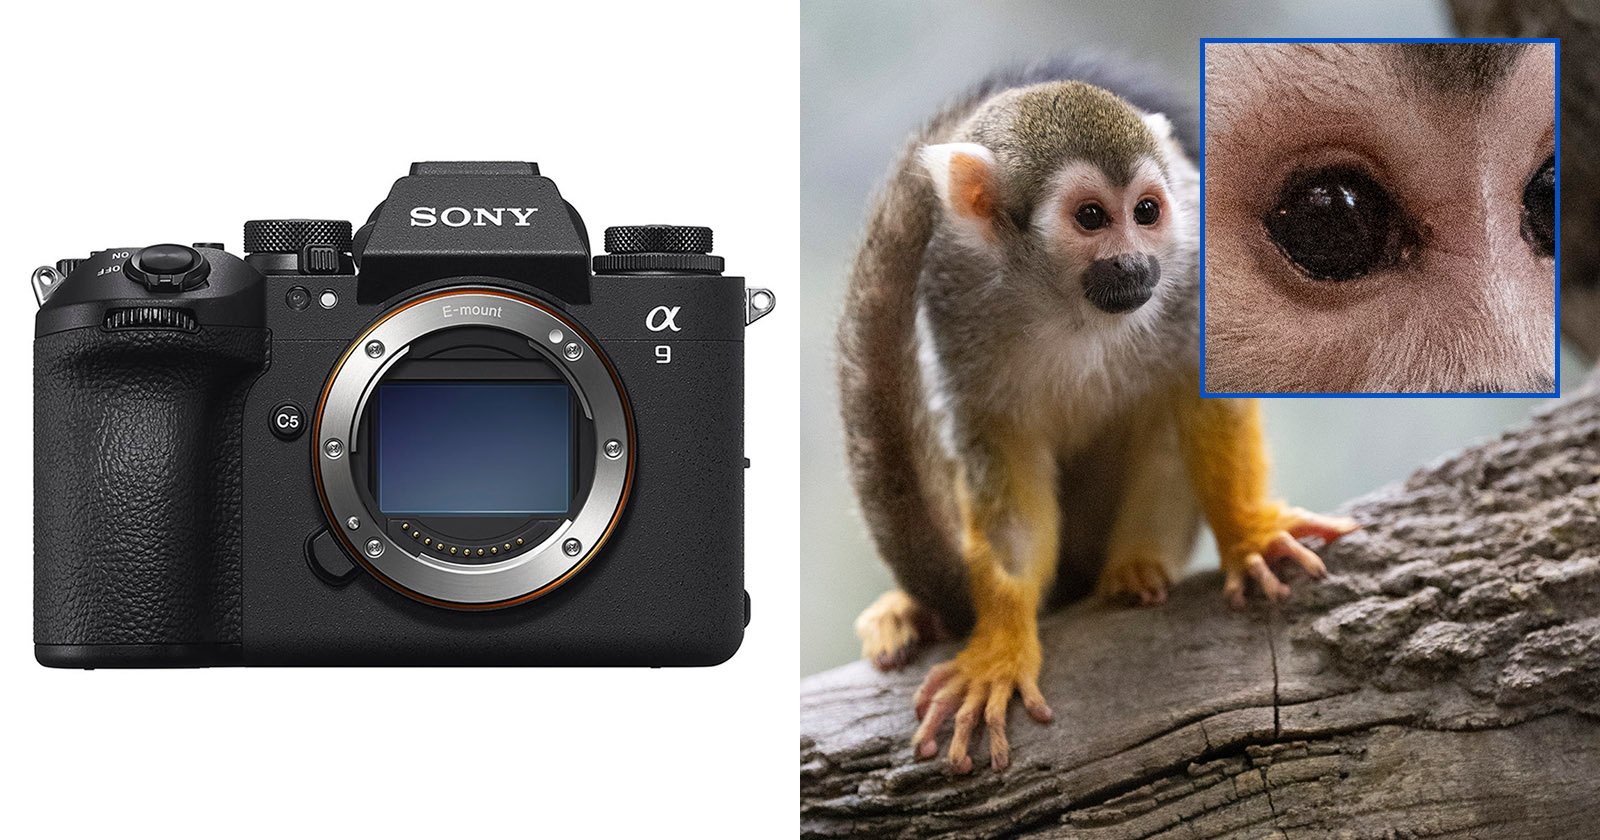 The Sony a9 III is Fast, But That Comes at a Noticeable Cost to Image Quality